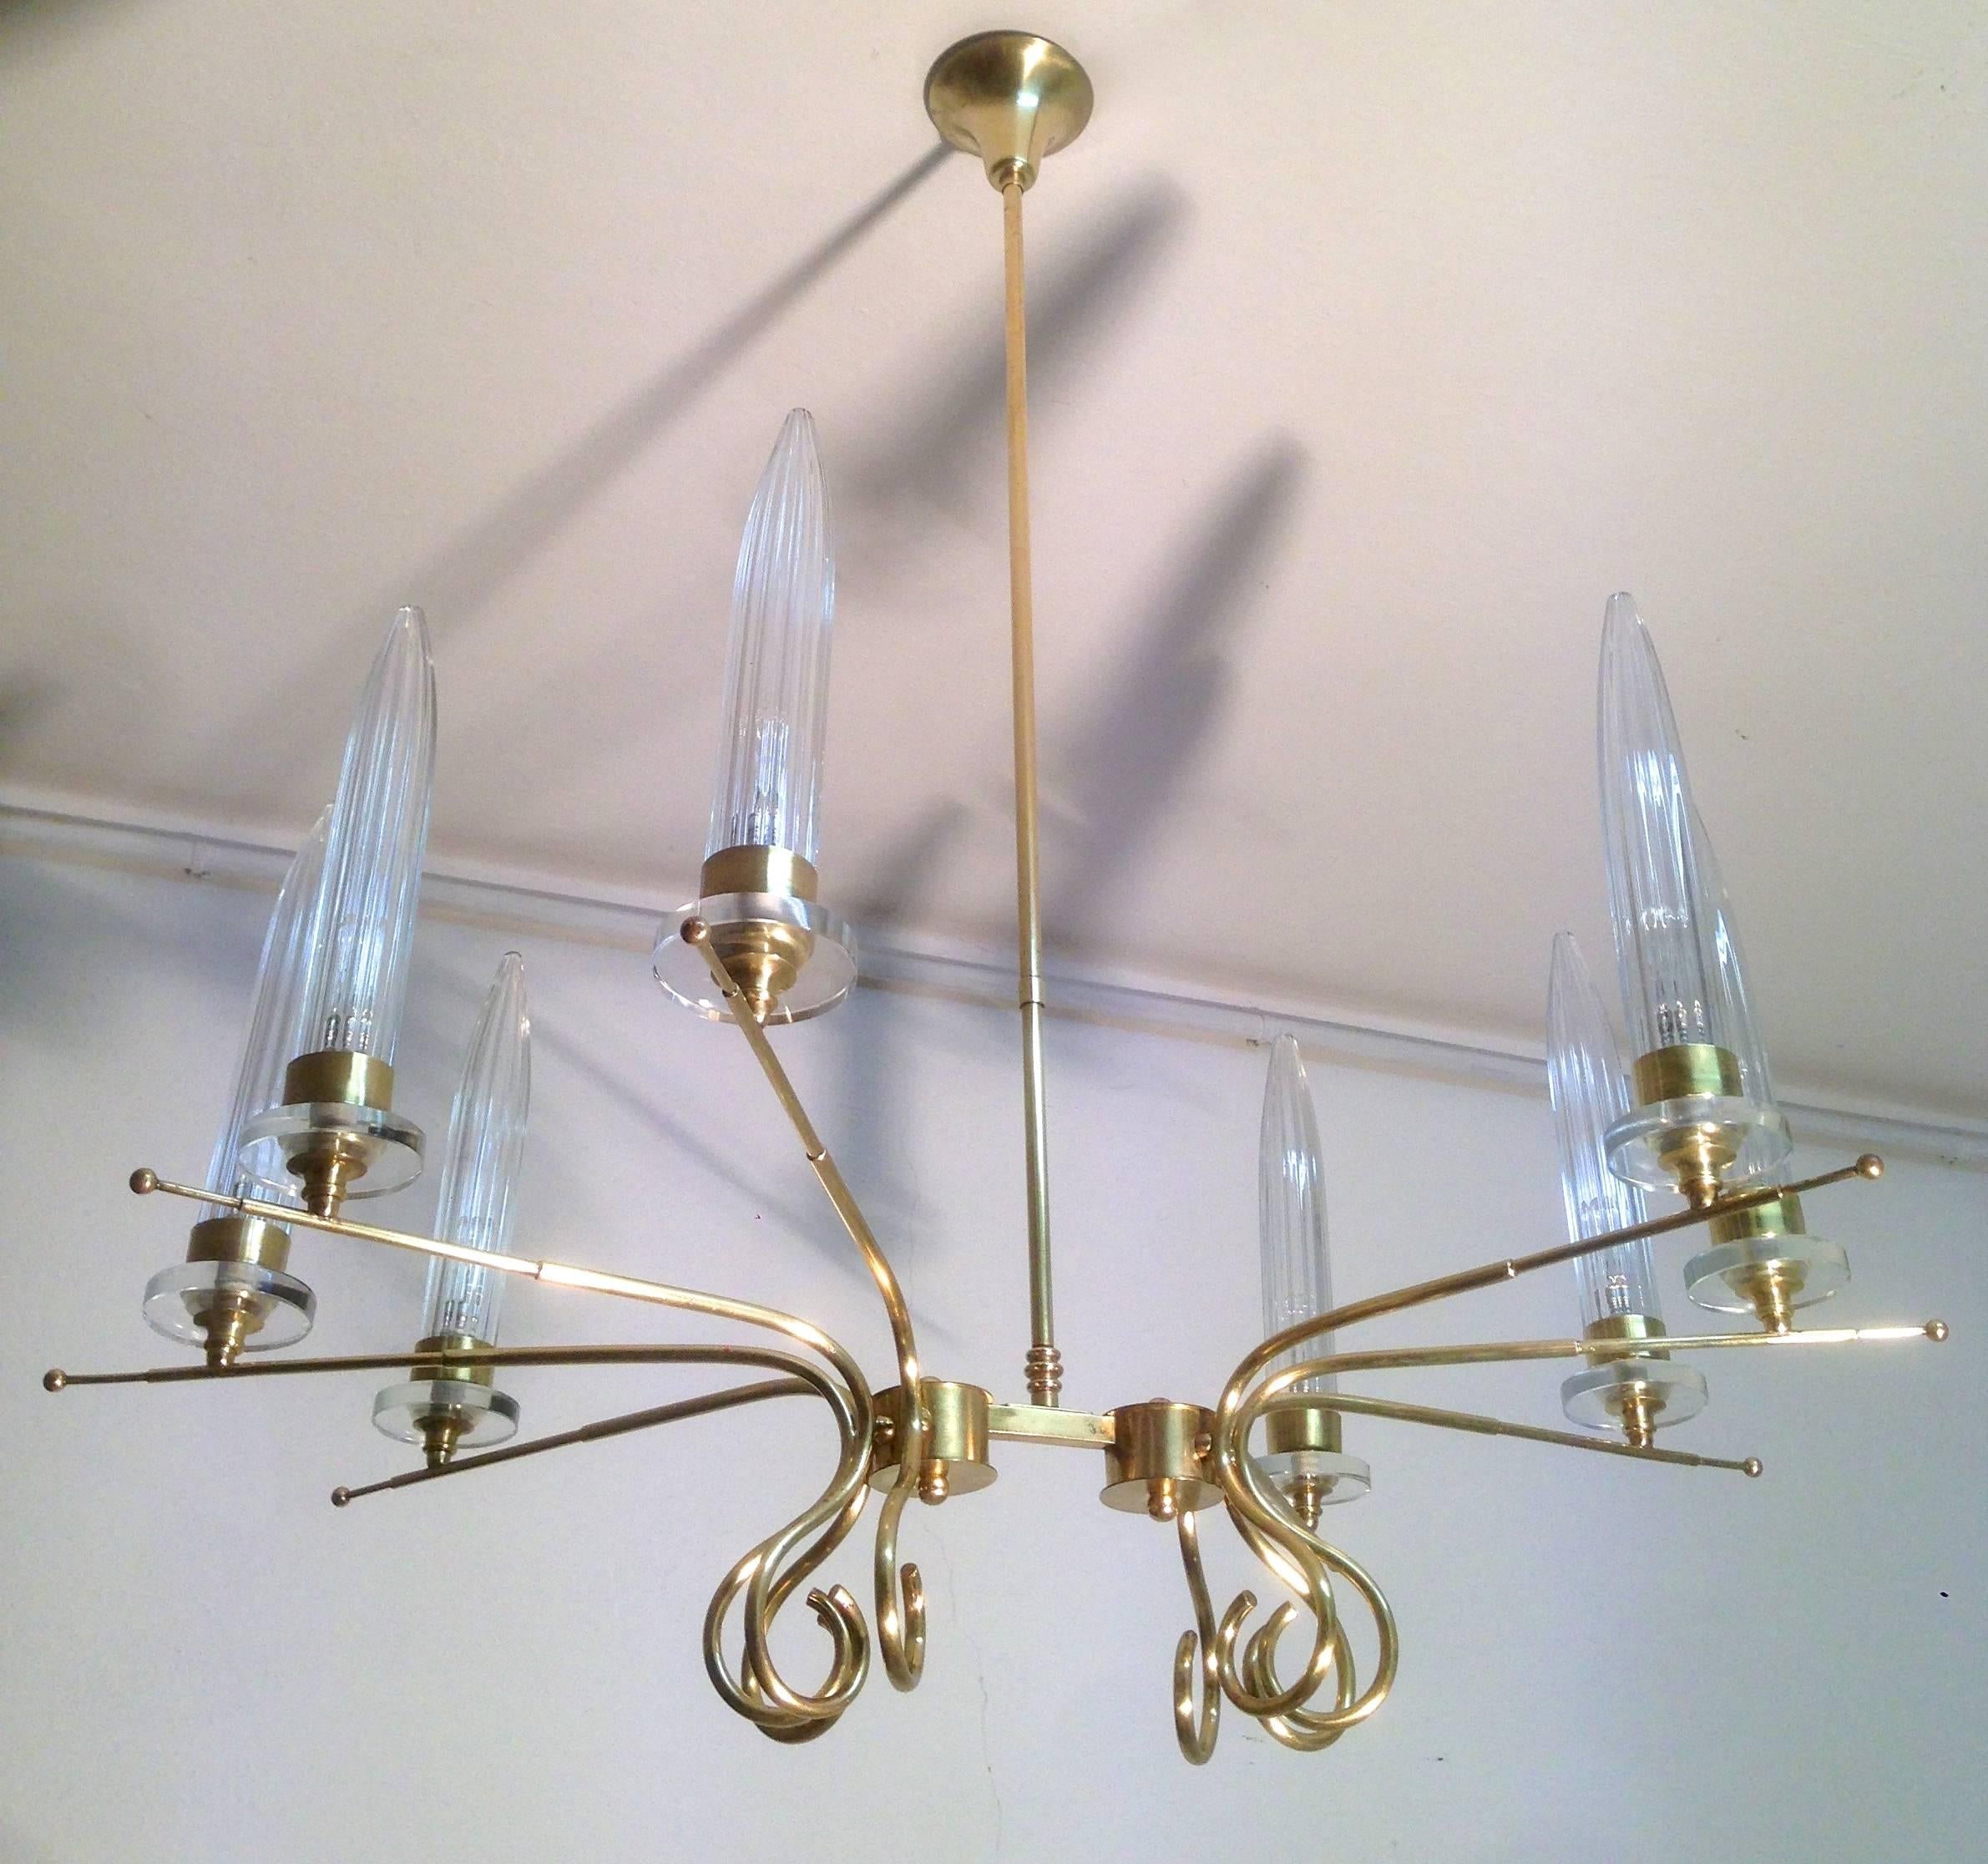 Very decorative and high quality brass and Murano glass chandelier.
The middle section divides the lamp in two sections where the brass arms stand out creating a wide Sputnik eight-arm chandelier. The handblown glass shades Stand like candles on